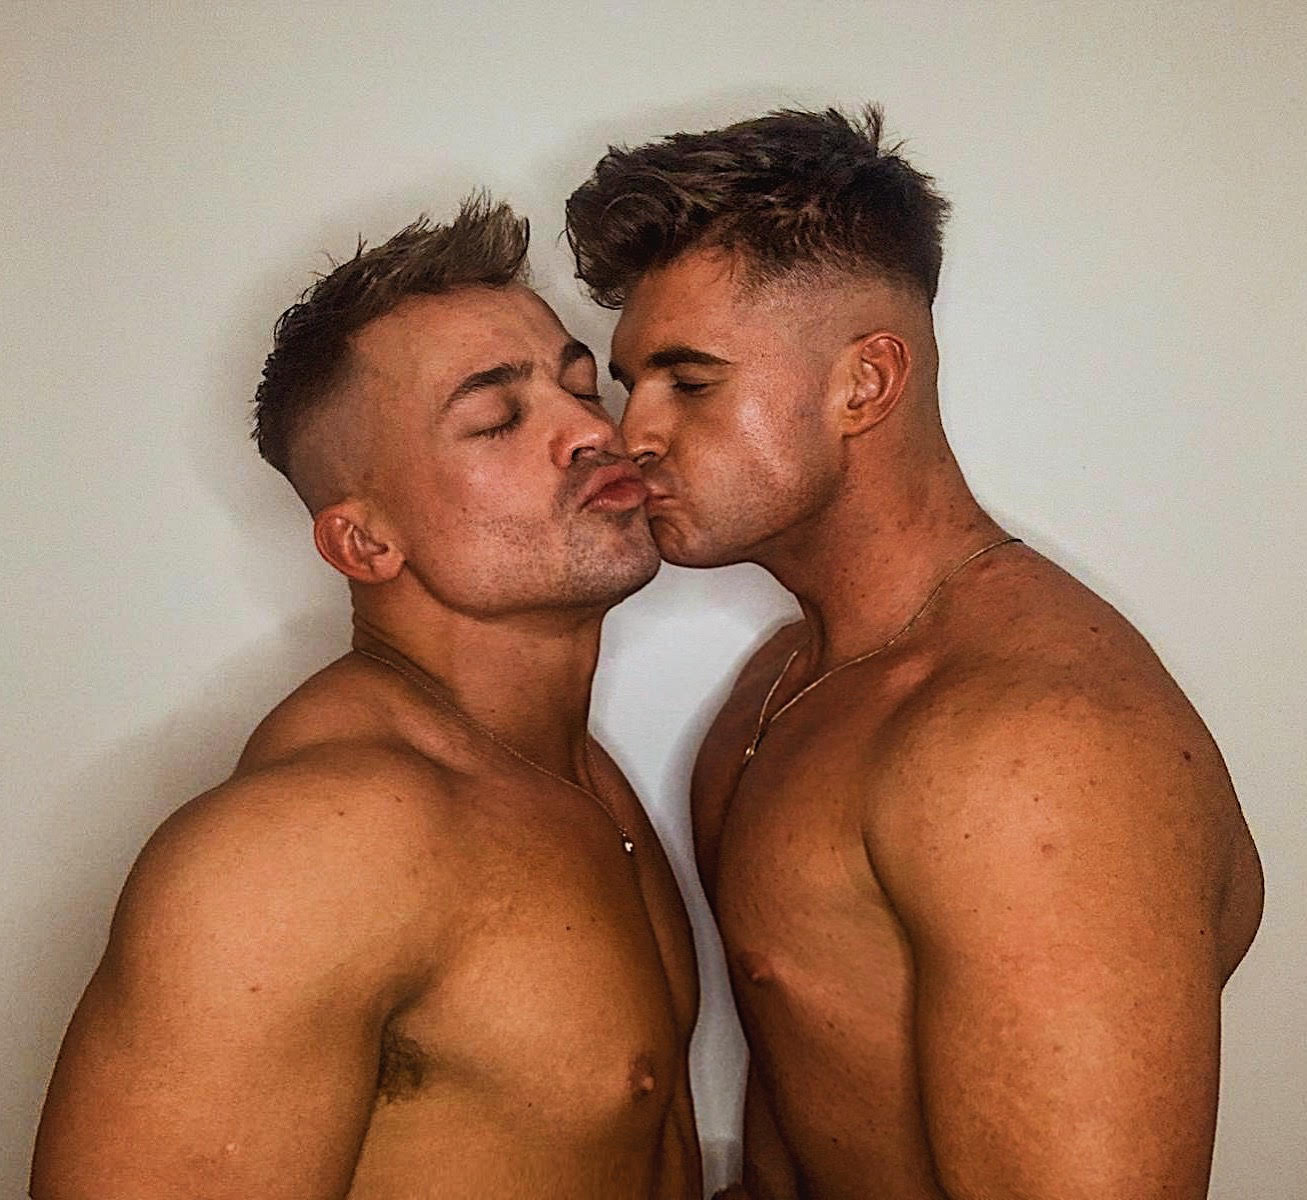 Best free gay onlyfans